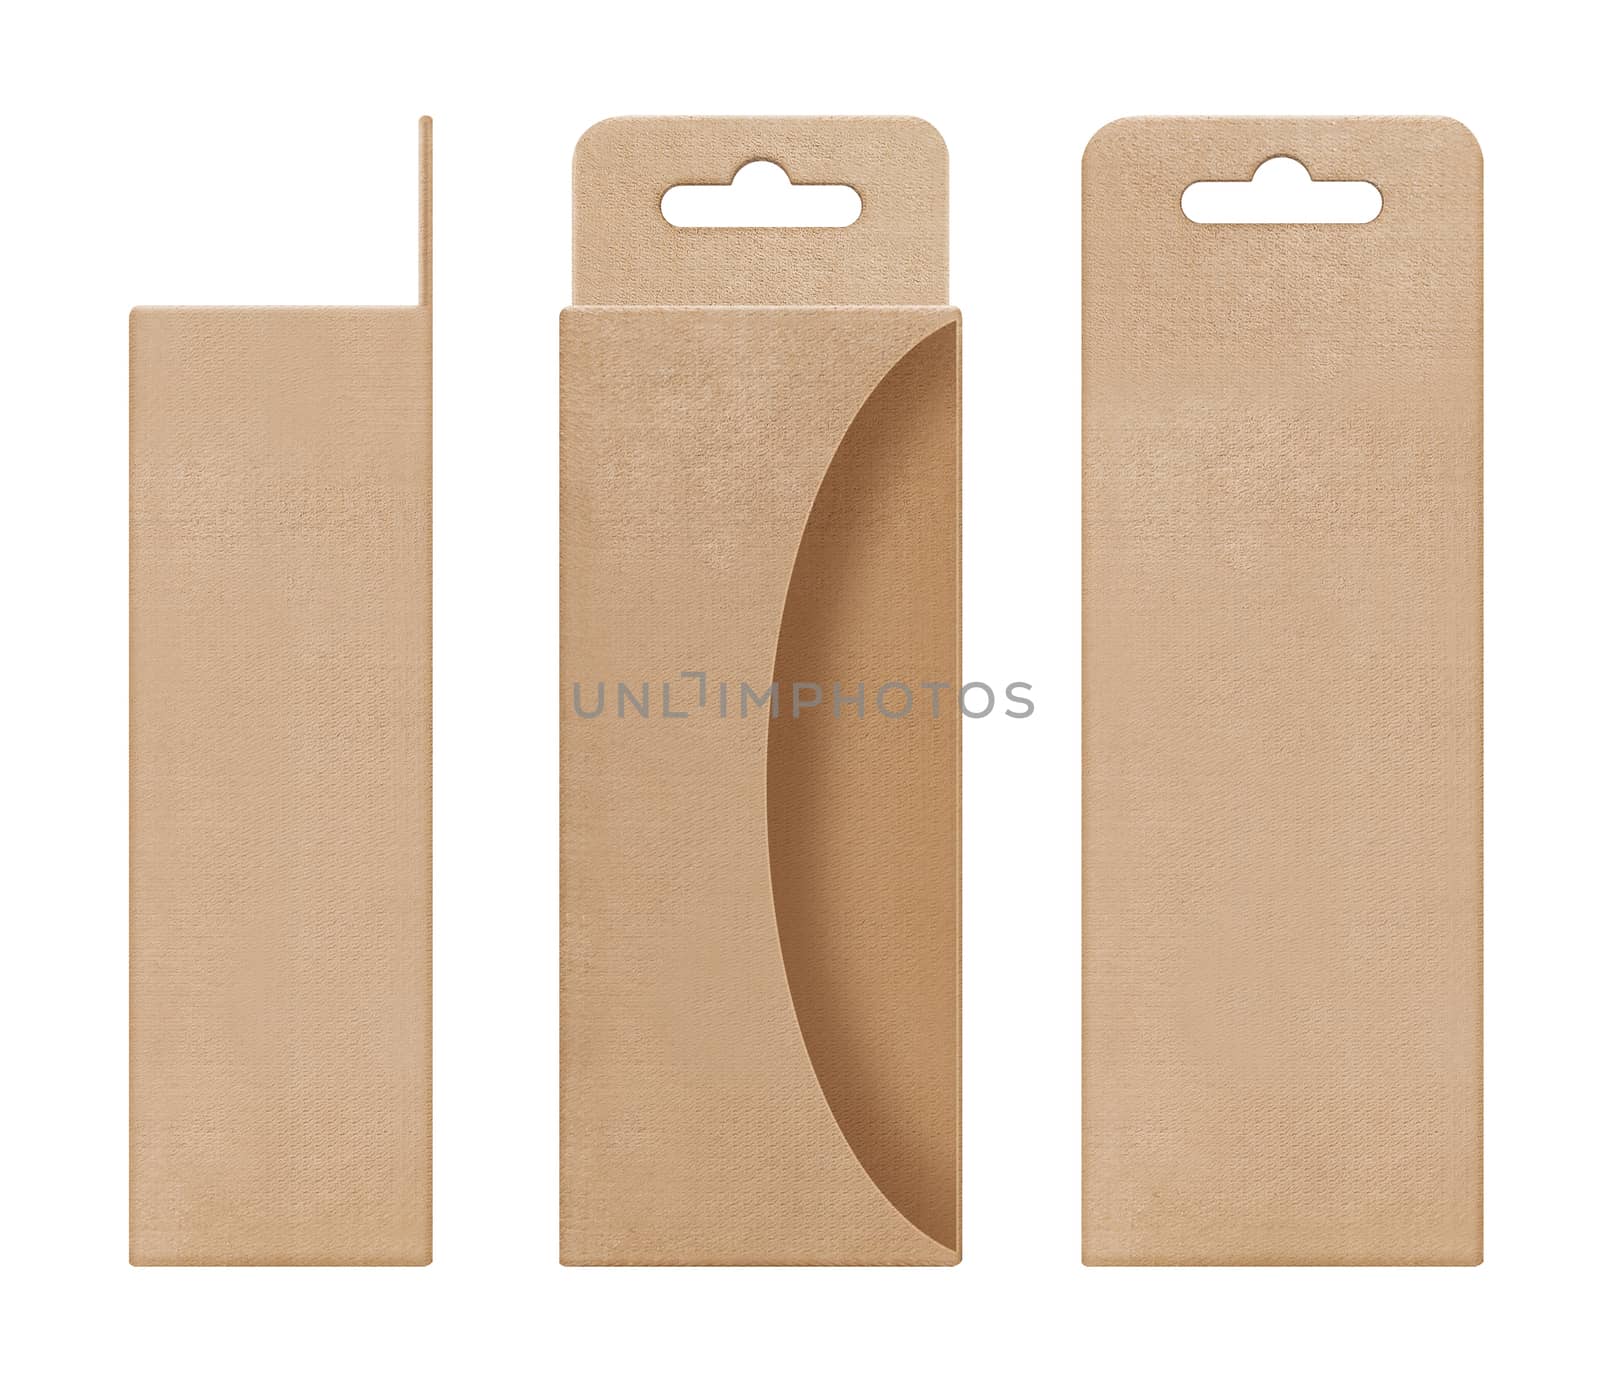 box, packaging, box brown for hanging cut out window shape open blank template for design product package by cgdeaw